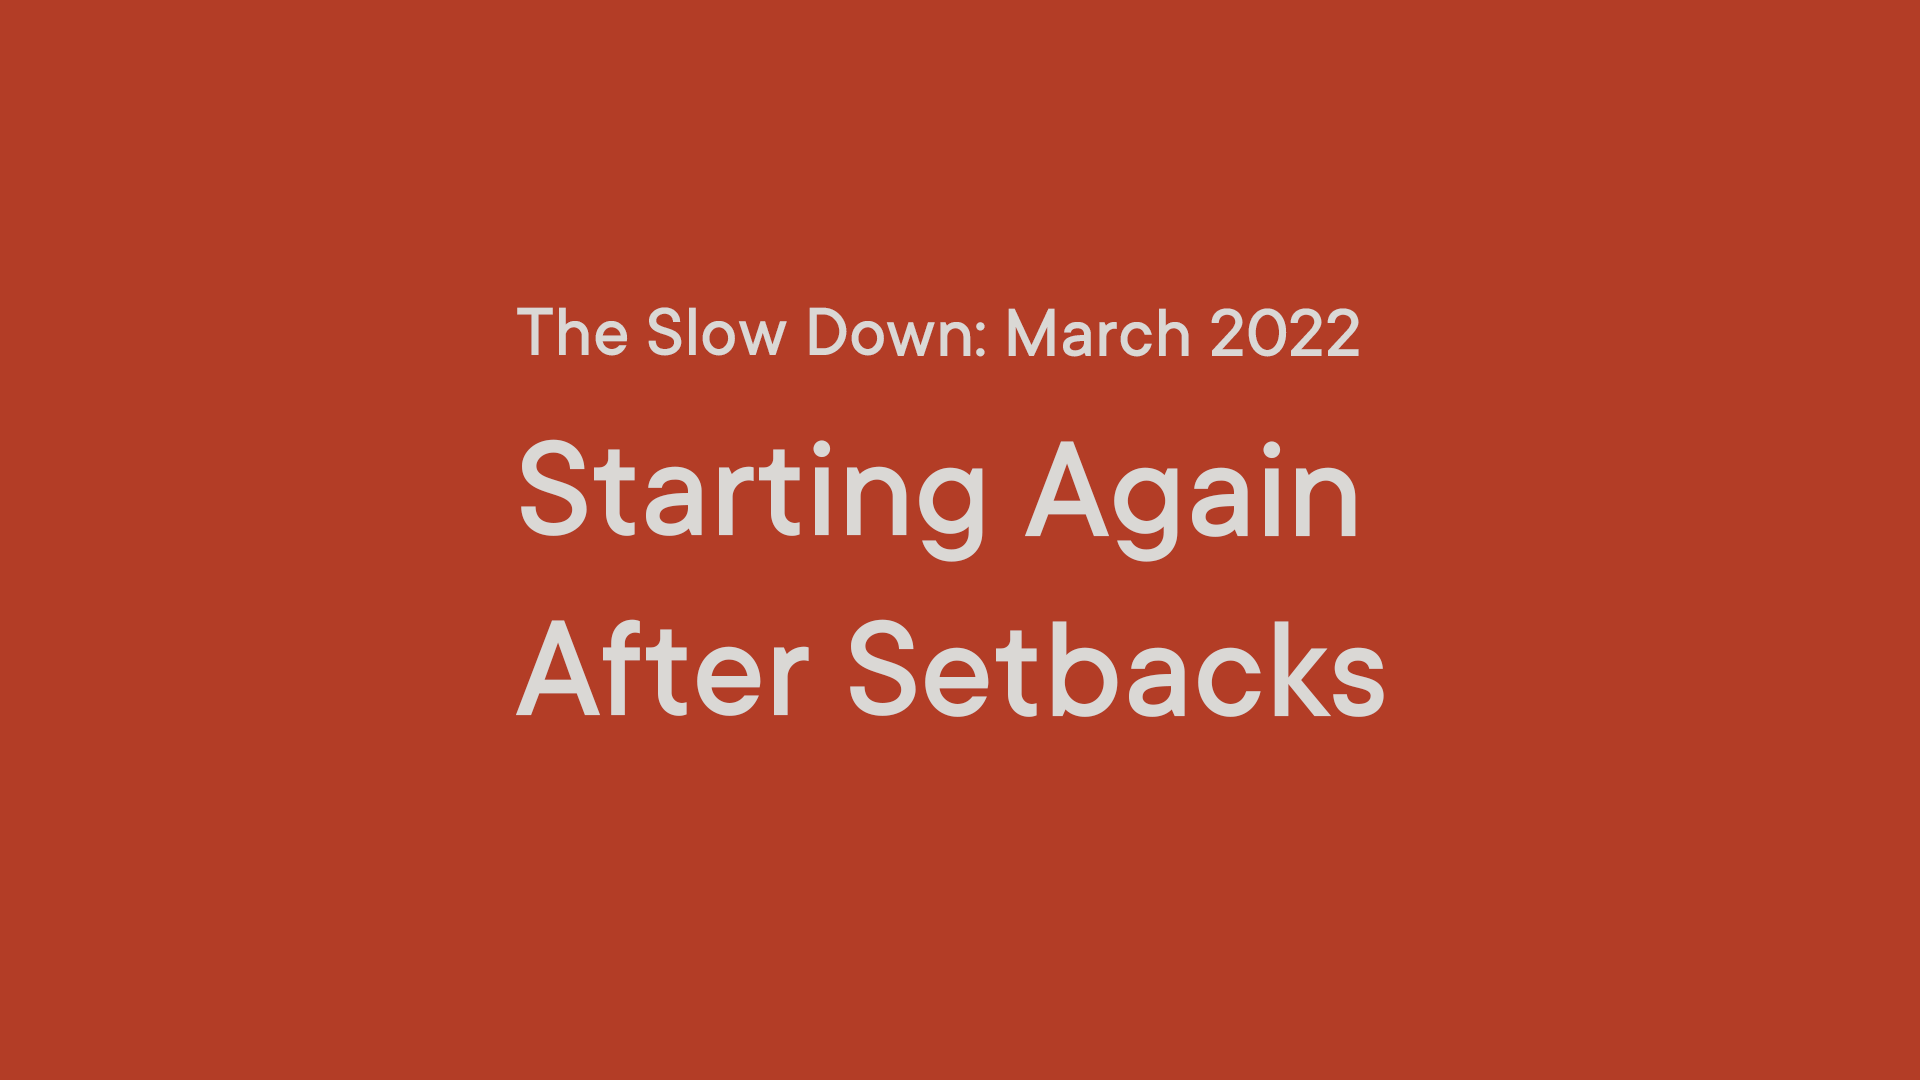 The Slow Down: Starting Again After Setback